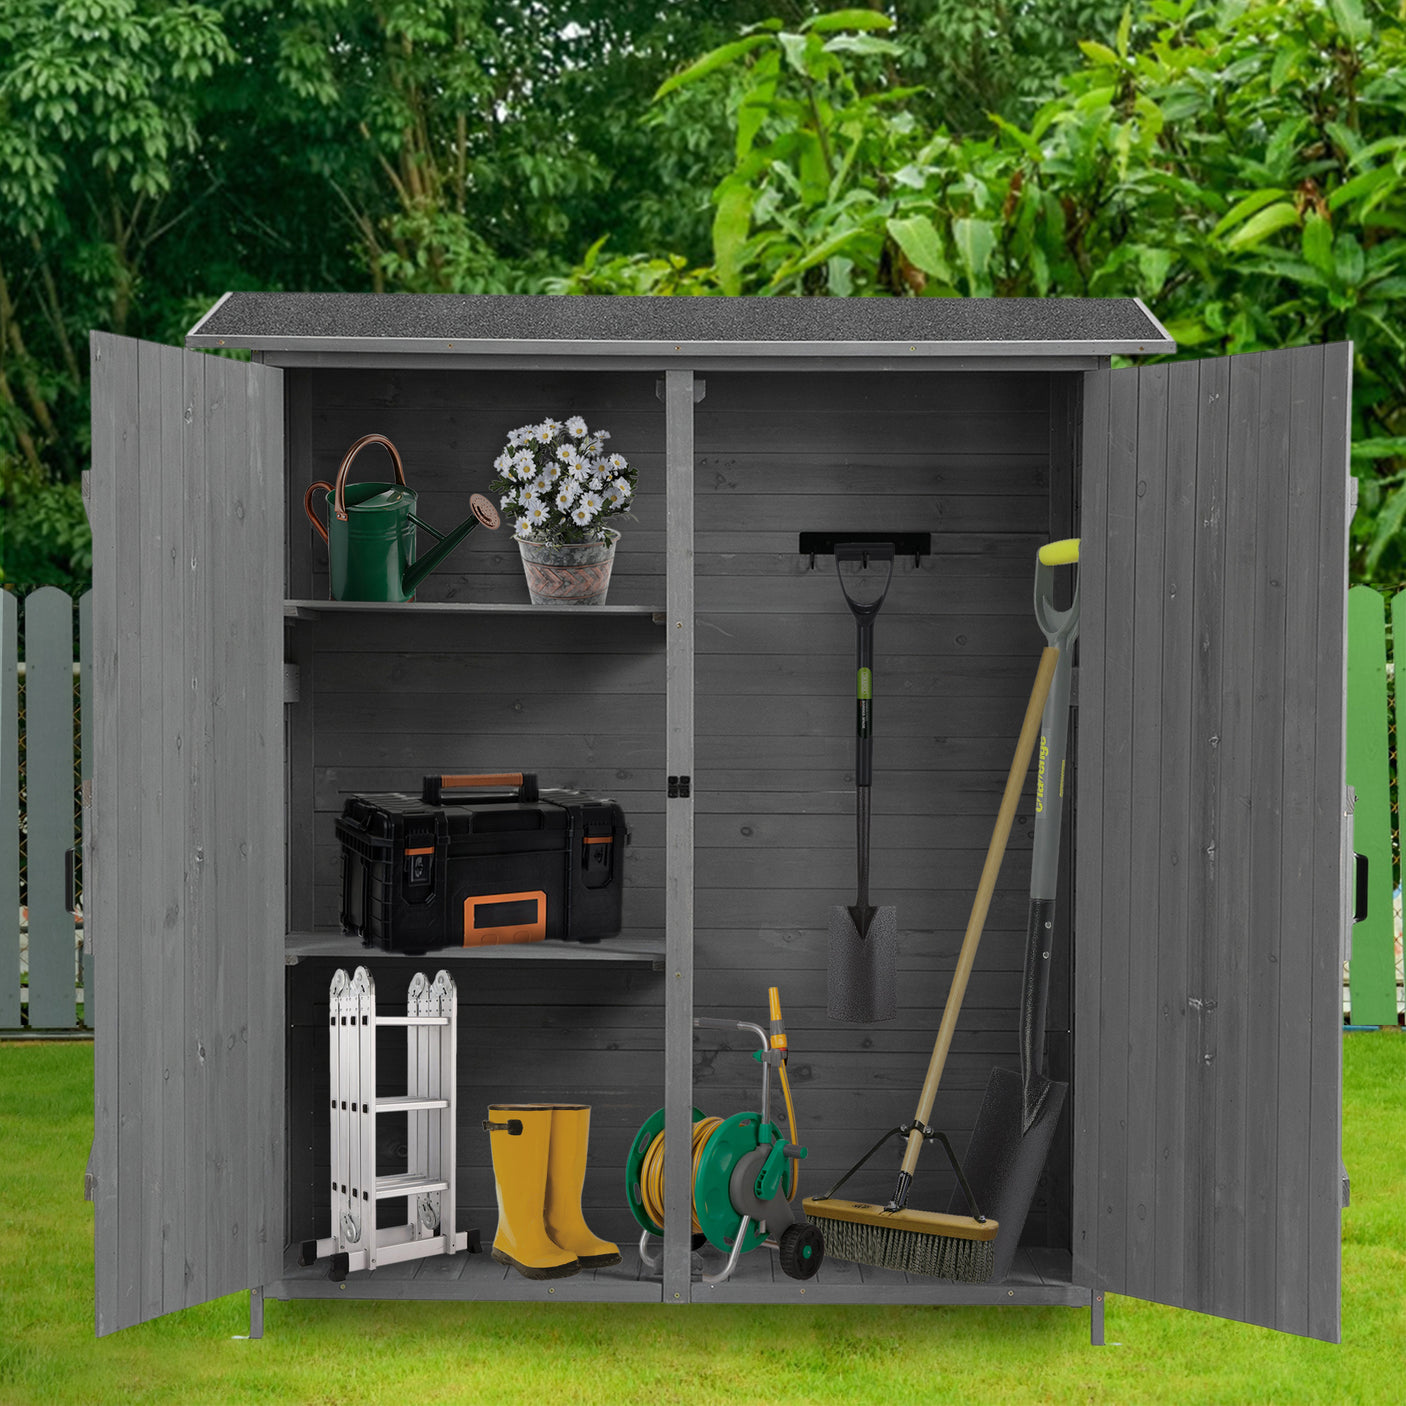 56”L x 19.5”W x 64”H Outdoor Storage Shed with Lockable Door, Wooden Tool Storage Shed w/Detachable Shelves & Pitch Roof,Gray